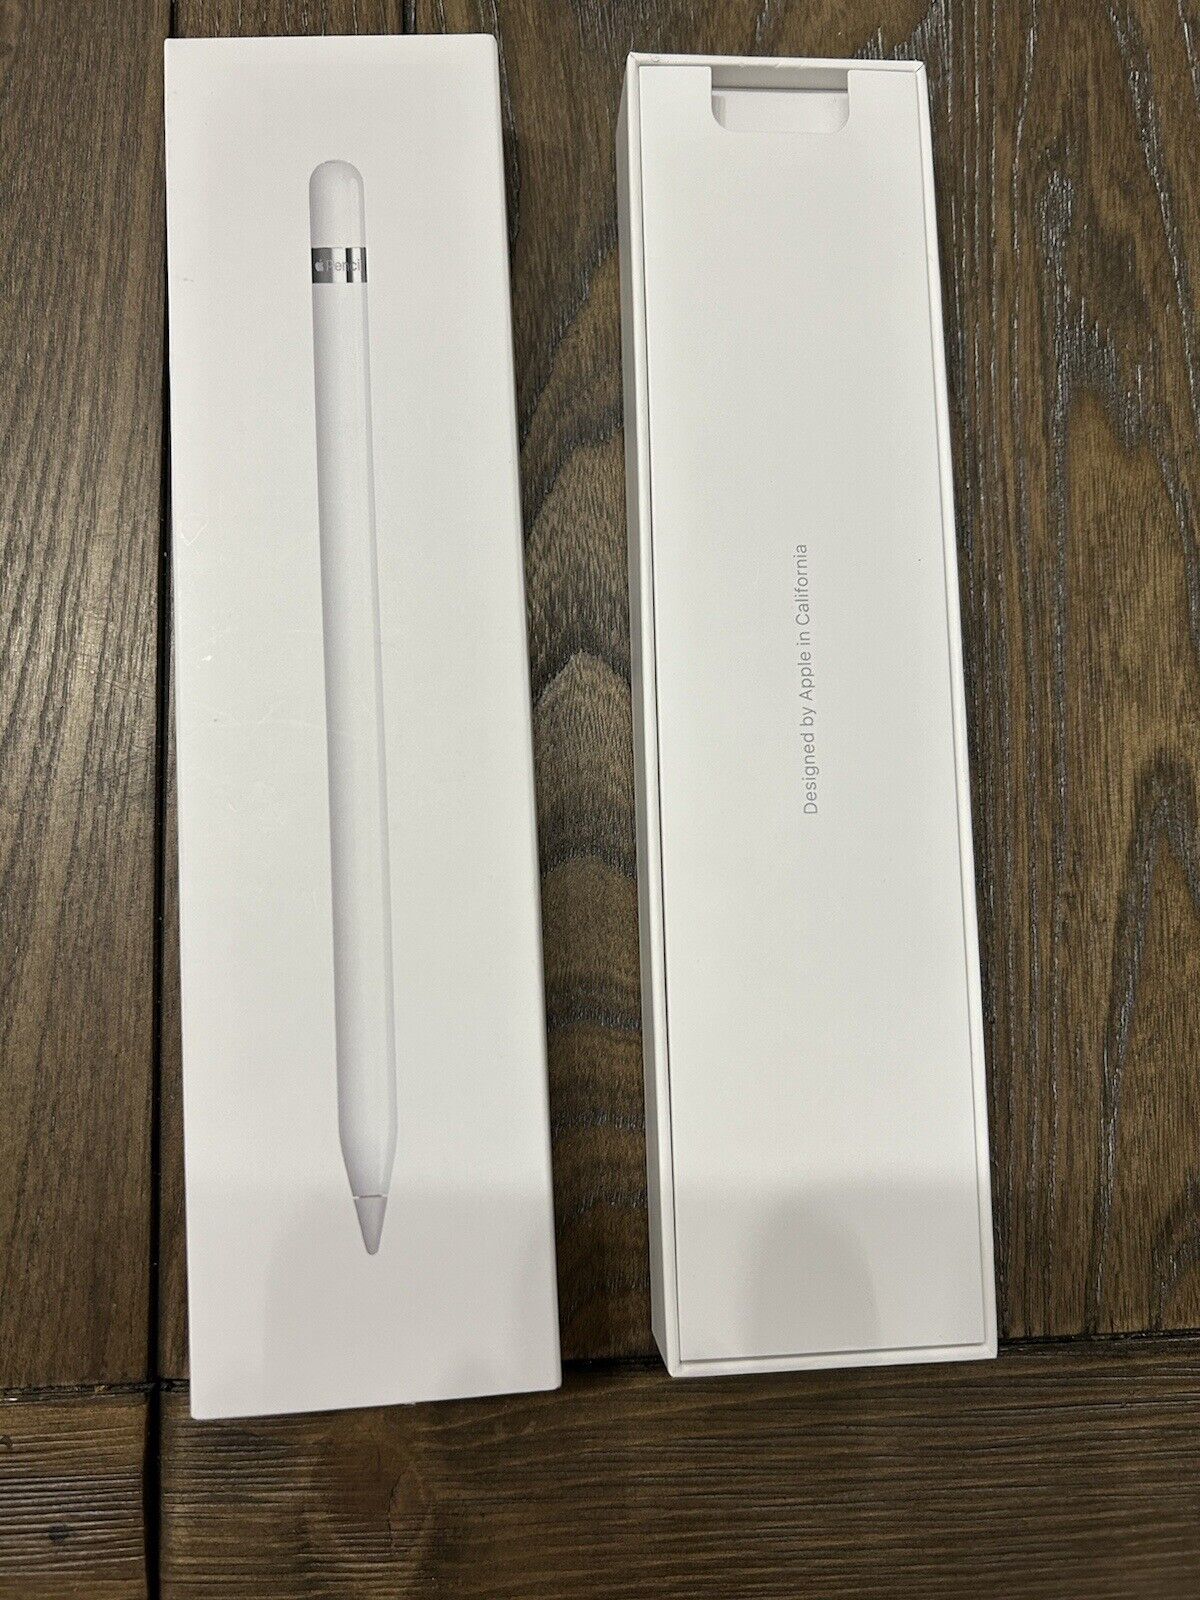 Apple Pencil - MK0C2AM/A; Excellent Condition; All Original Packaging